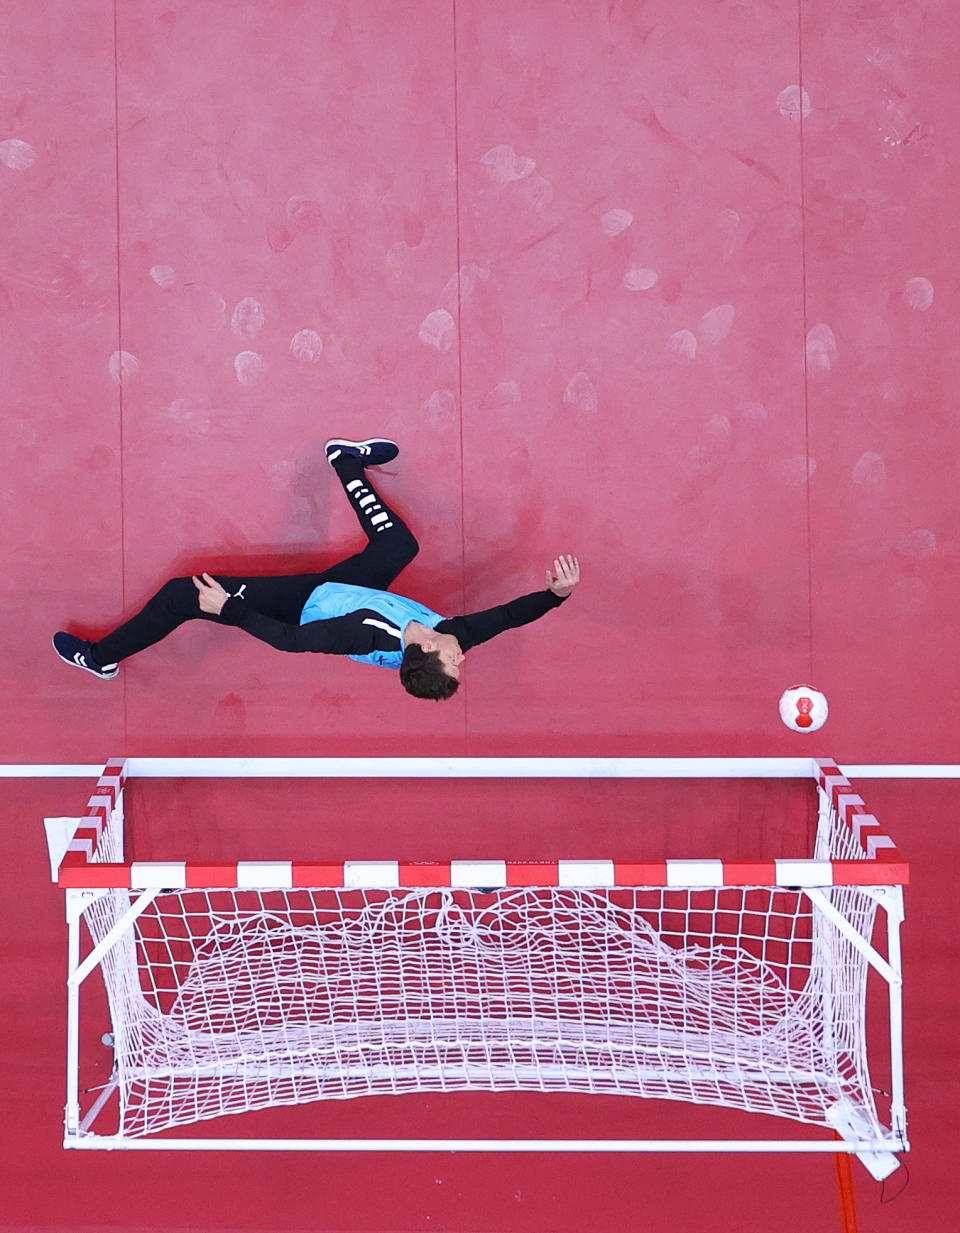 <p>TOKYO, JAPAN - JULY 26: Niklas Landin of Team Denmark dives for the ball during the Men's Preliminary Round Group B match between Egypt and Denmark on day three of the Tokyo 2020 Olympic Games at Yoyogi National Stadium on July 26, 2021 in Tokyo, Japan. (Photo by Dean Mouhtaropoulos/Getty Images)</p> 